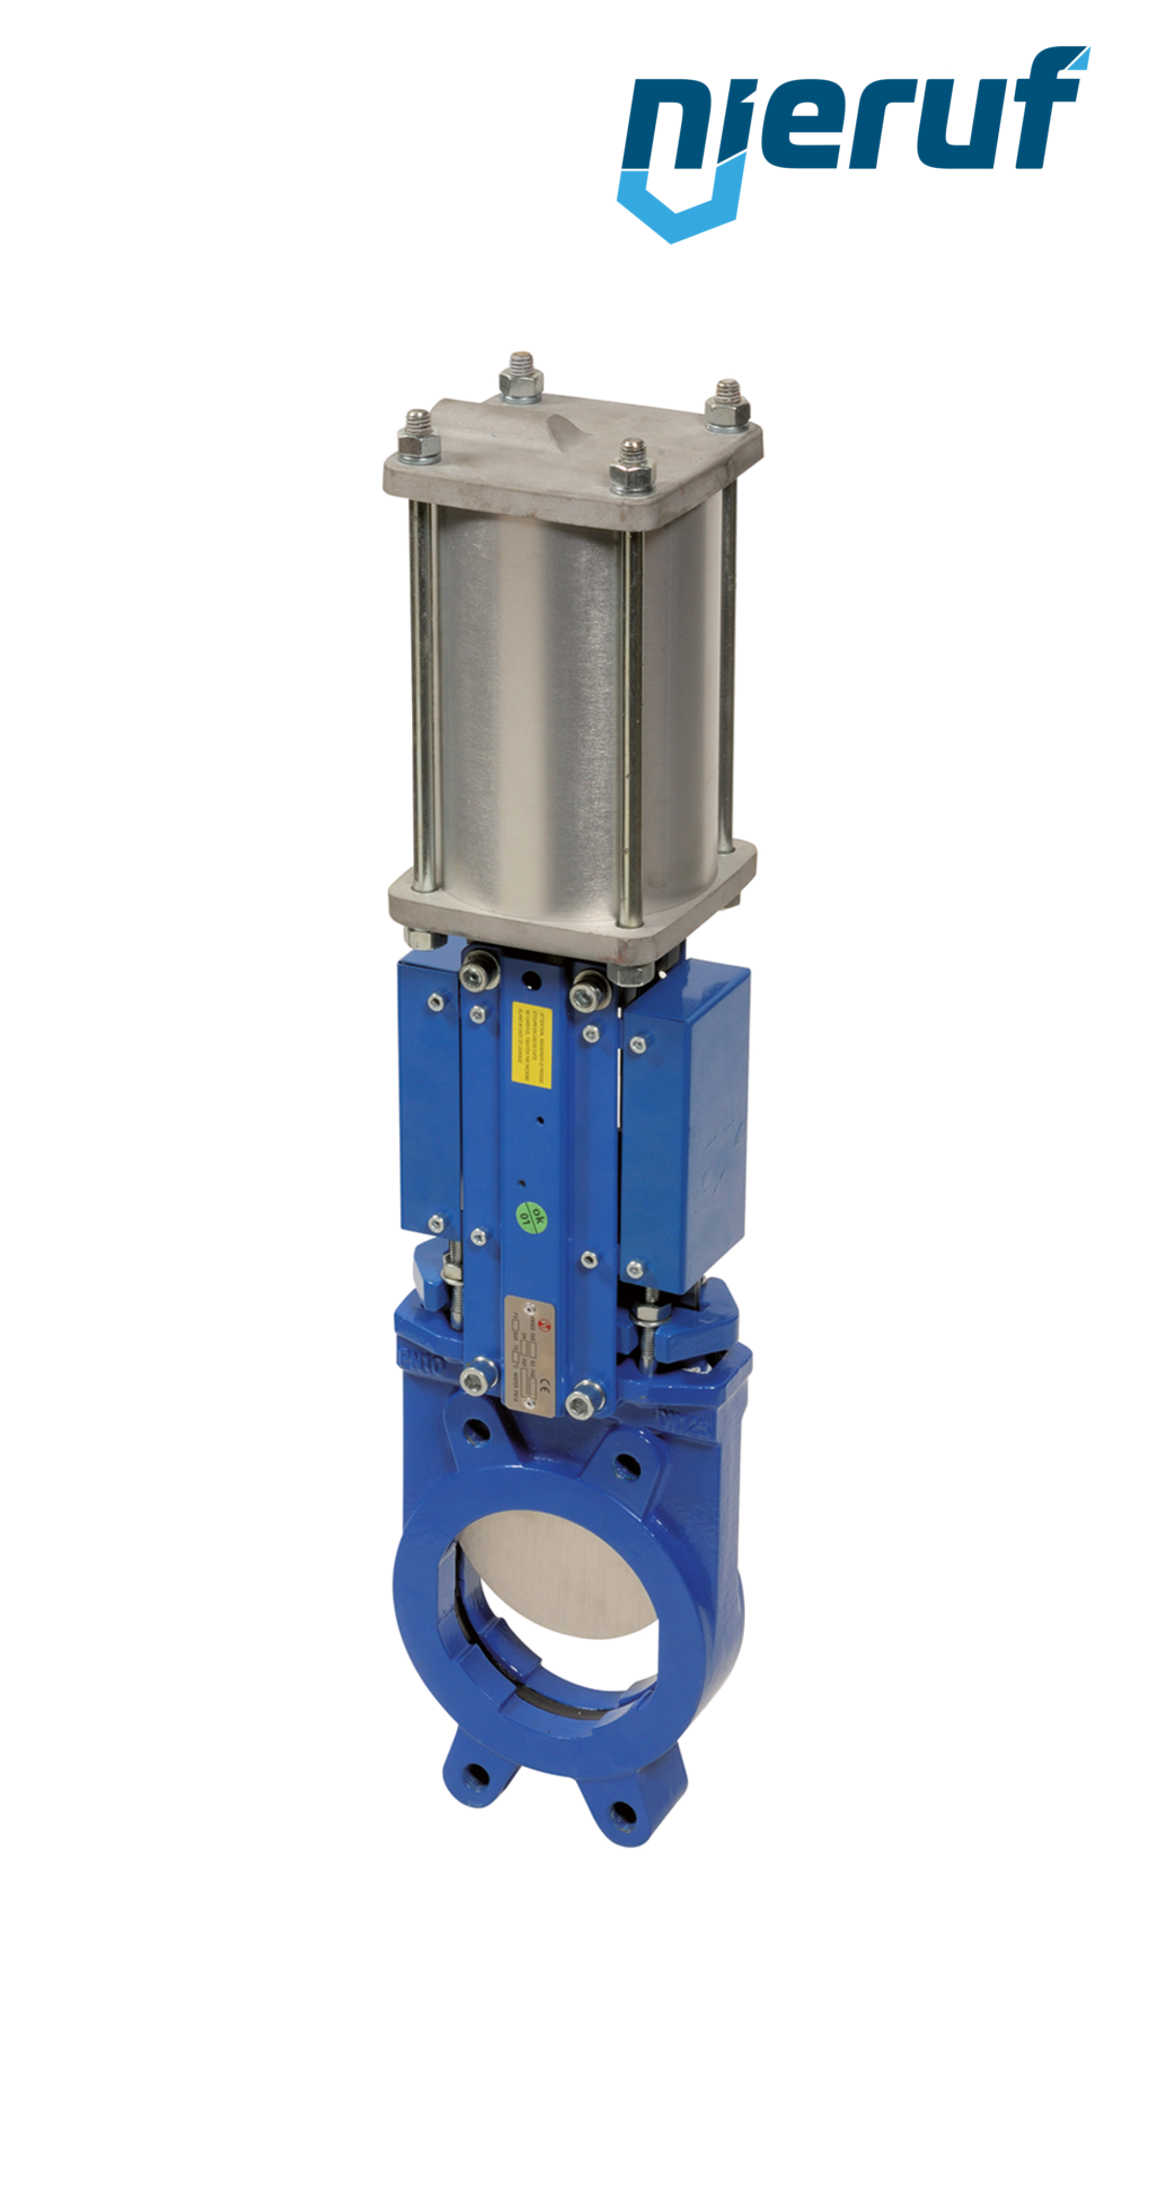 Knife gate valve DN 65 SR01 NBR pneumatic actuation double acting